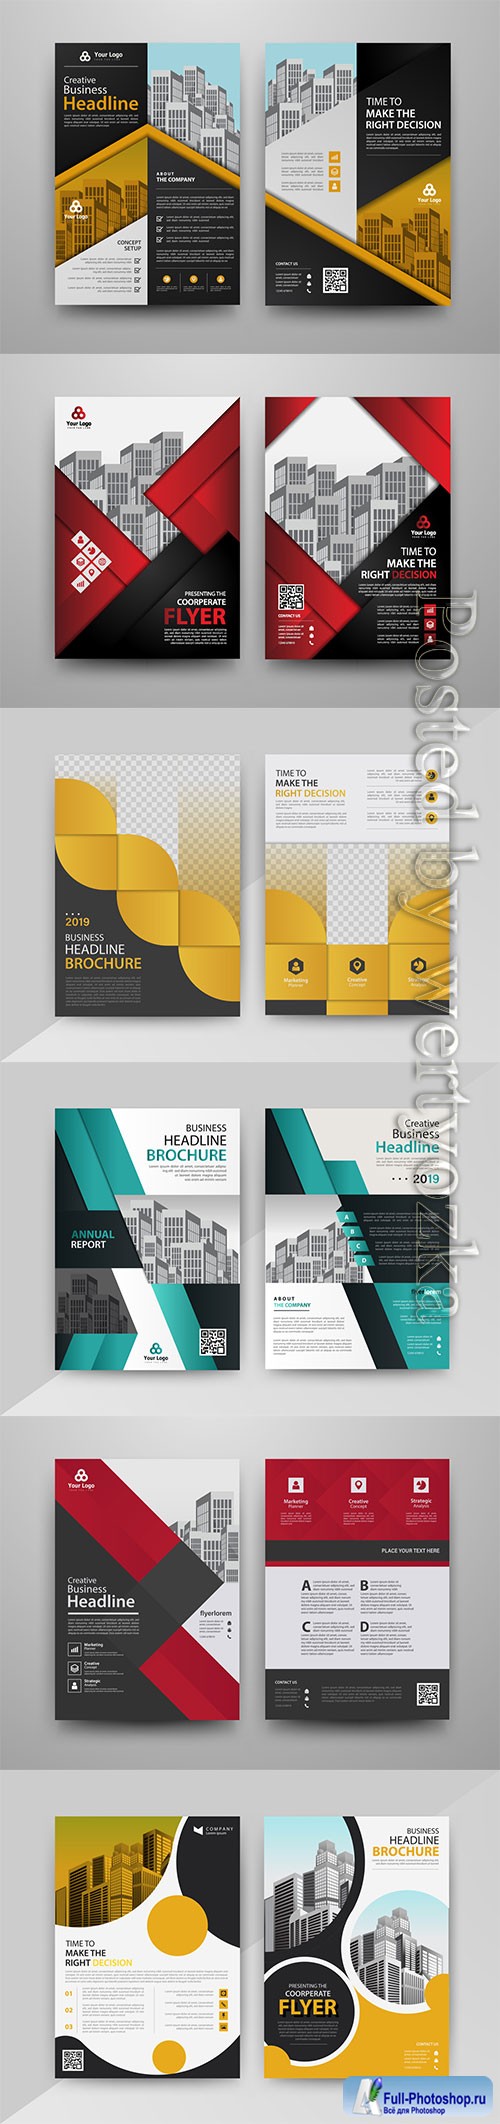 Business vector flyer template design with abstract